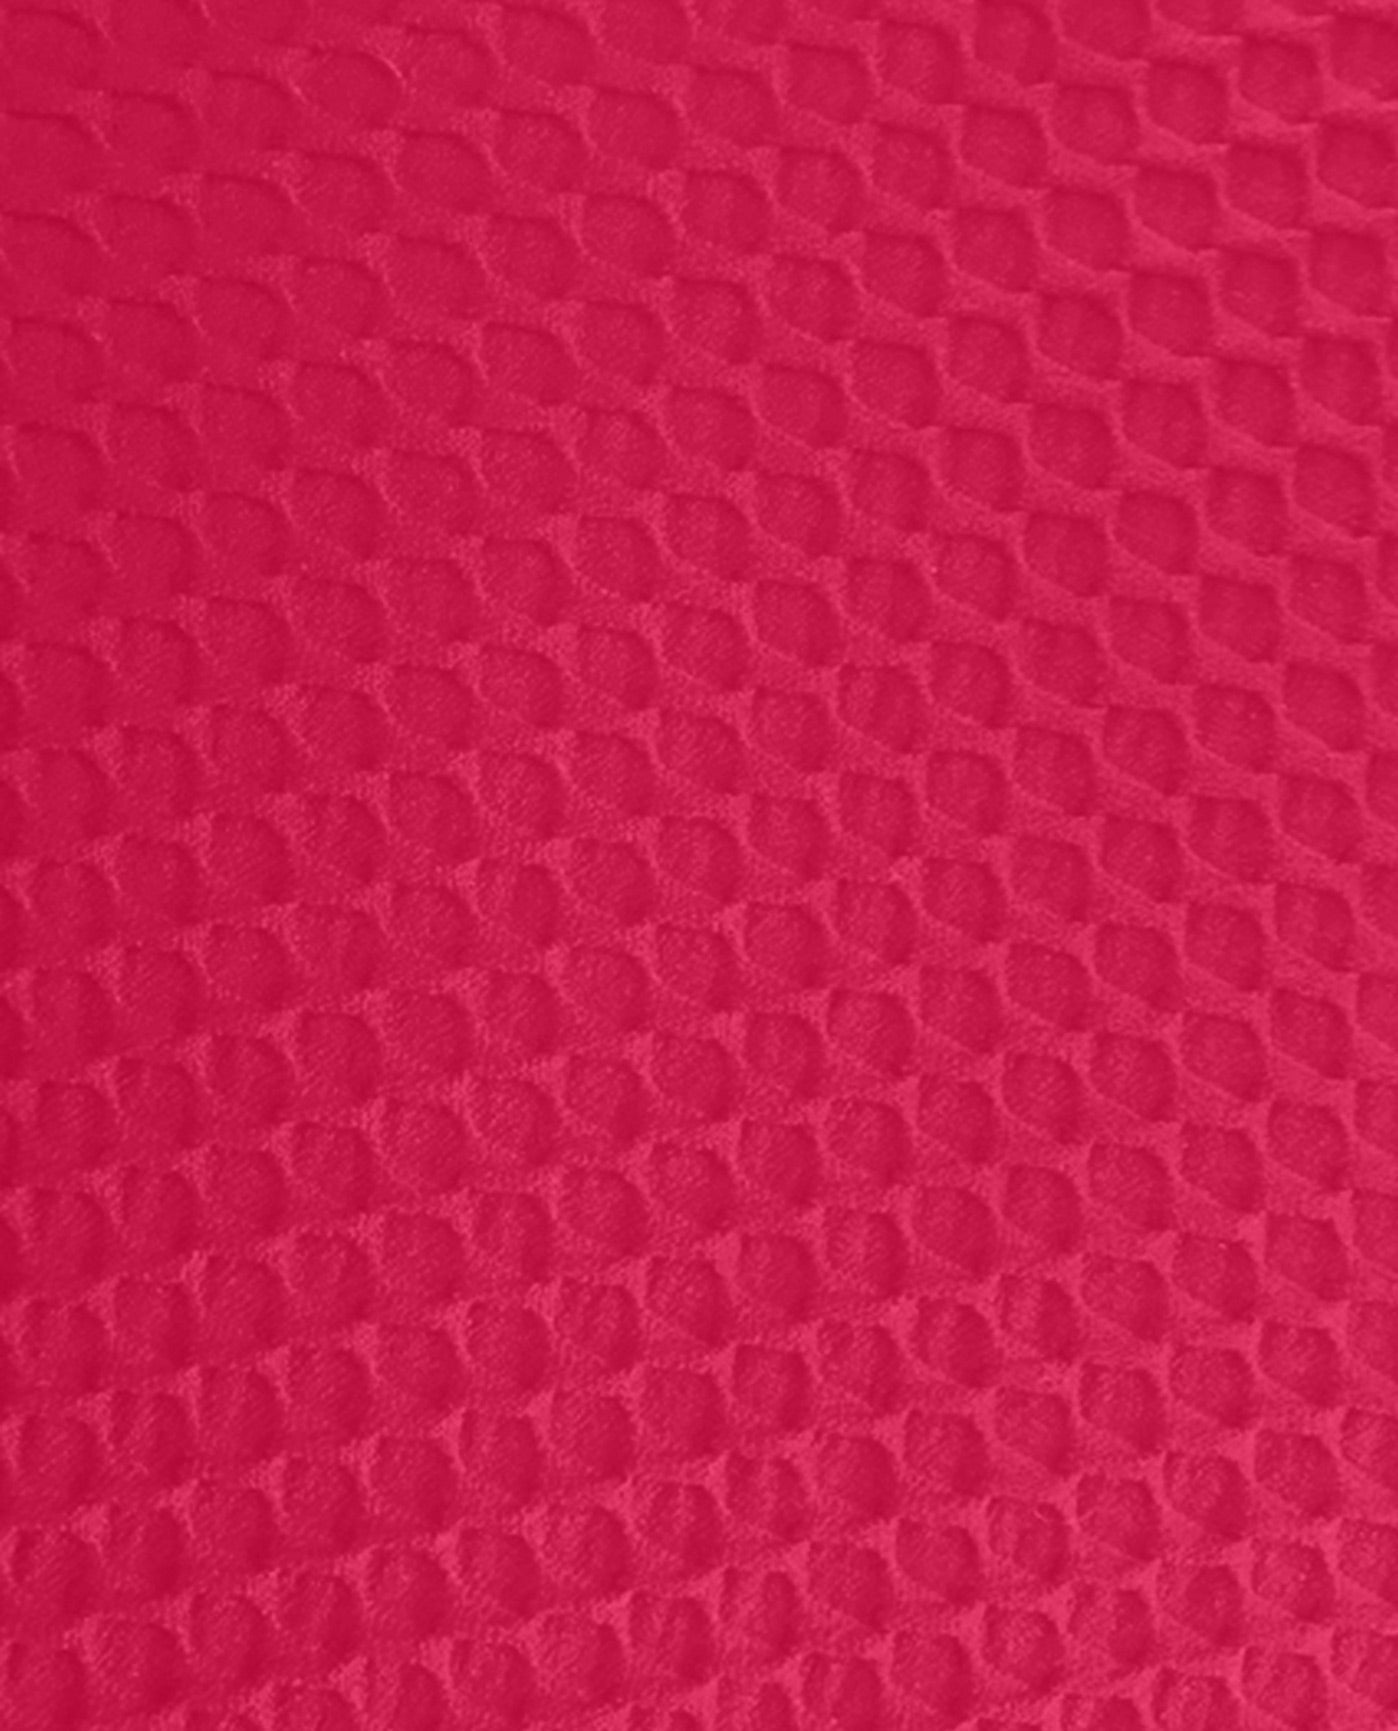 FABRIC SWATCH VIEW OF CHLORINE RESISTANT AQUAMORE SOLID TEXTURED HIGH NECK ONE PIECE SWIMSUIT | 511 AQT TEXTURED RASPBERRY